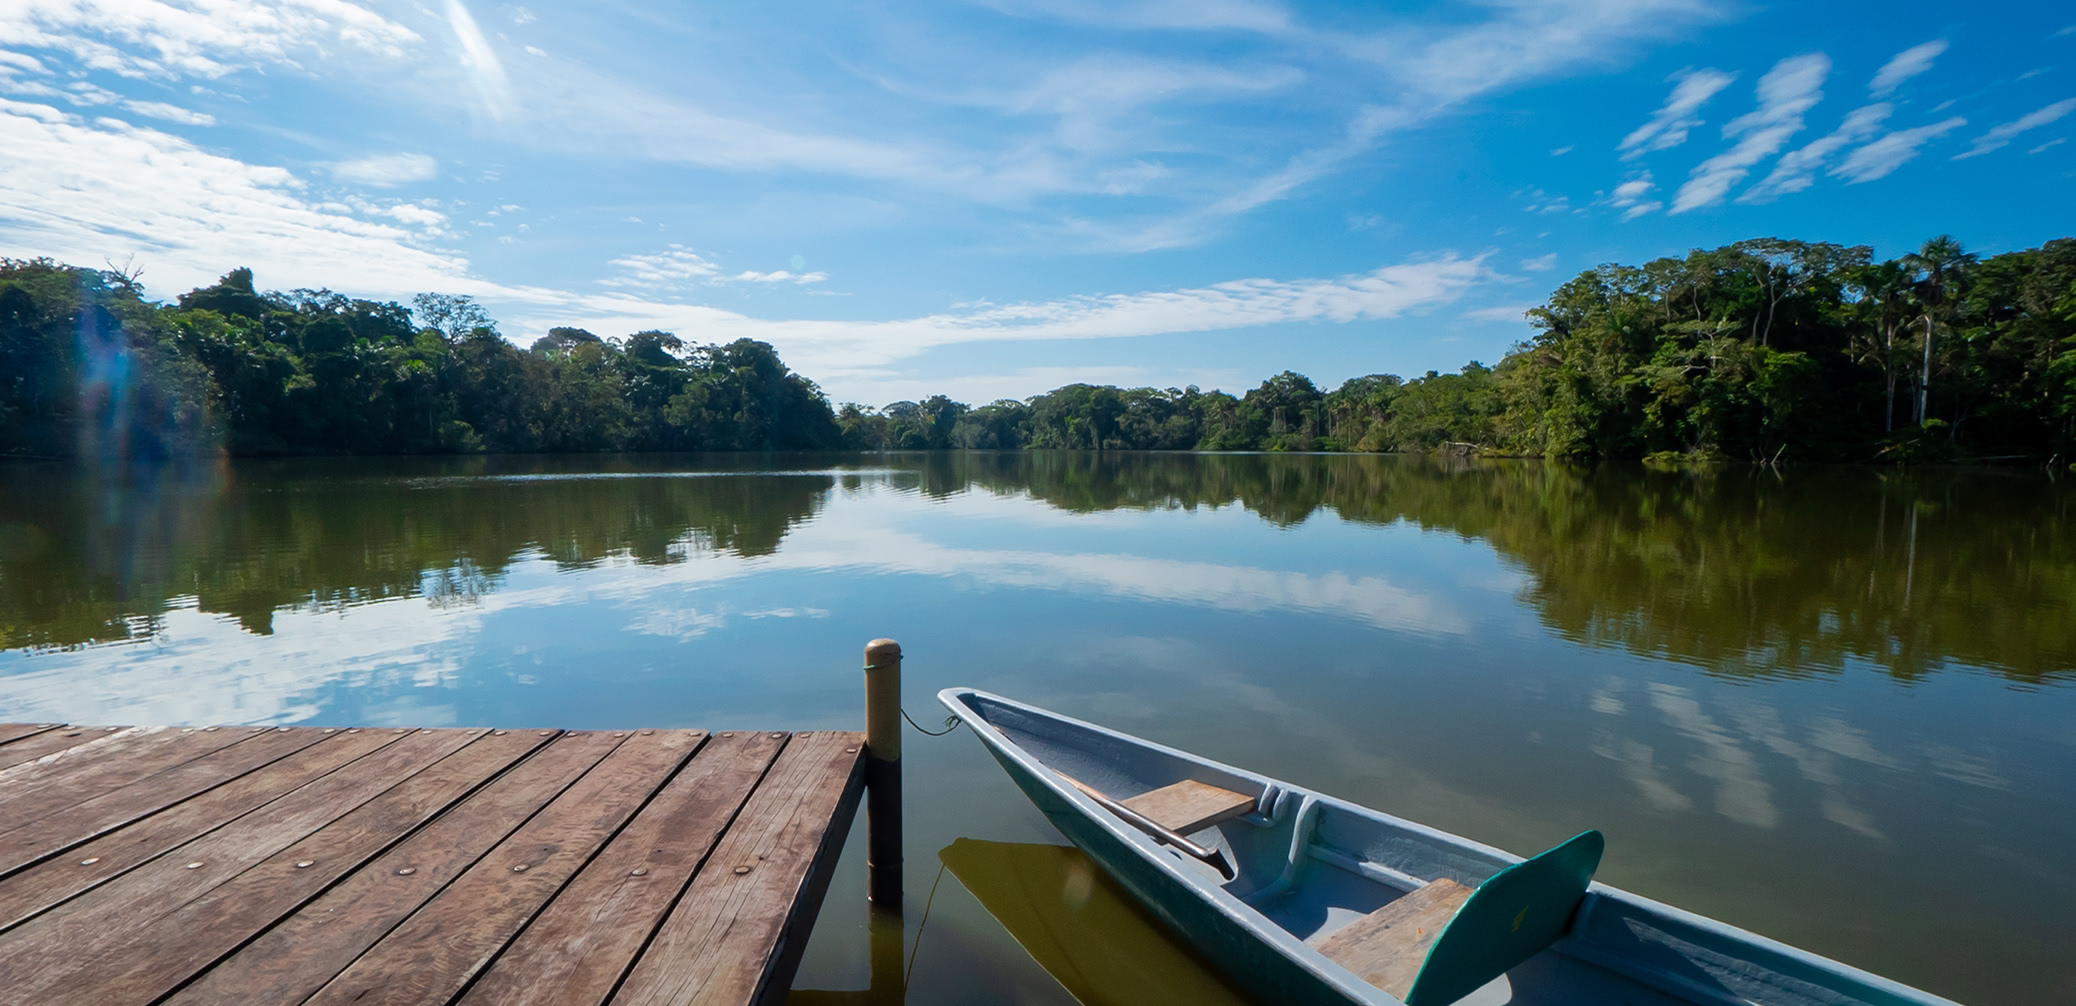 Bid On Once In A Lifetime 3 Night Amazon Lodge Stay